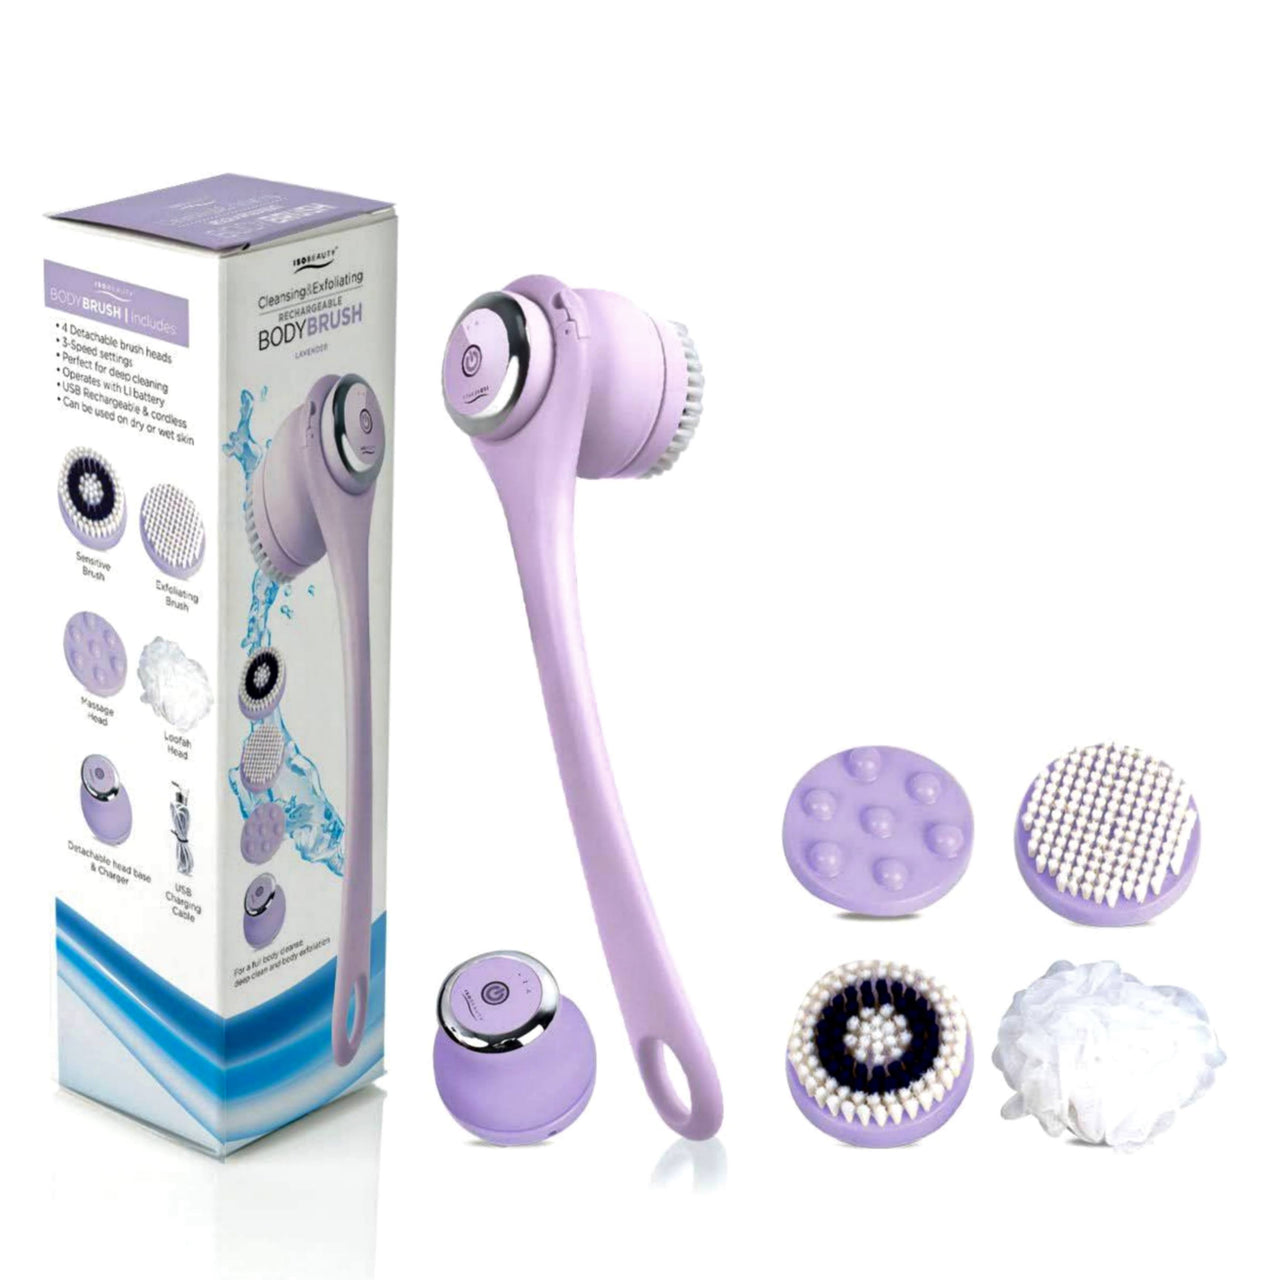 Wireless Waterproof Cleansing and Exfoliating Body Brush Set with 3 Speed 4 Brush Heads Lavender